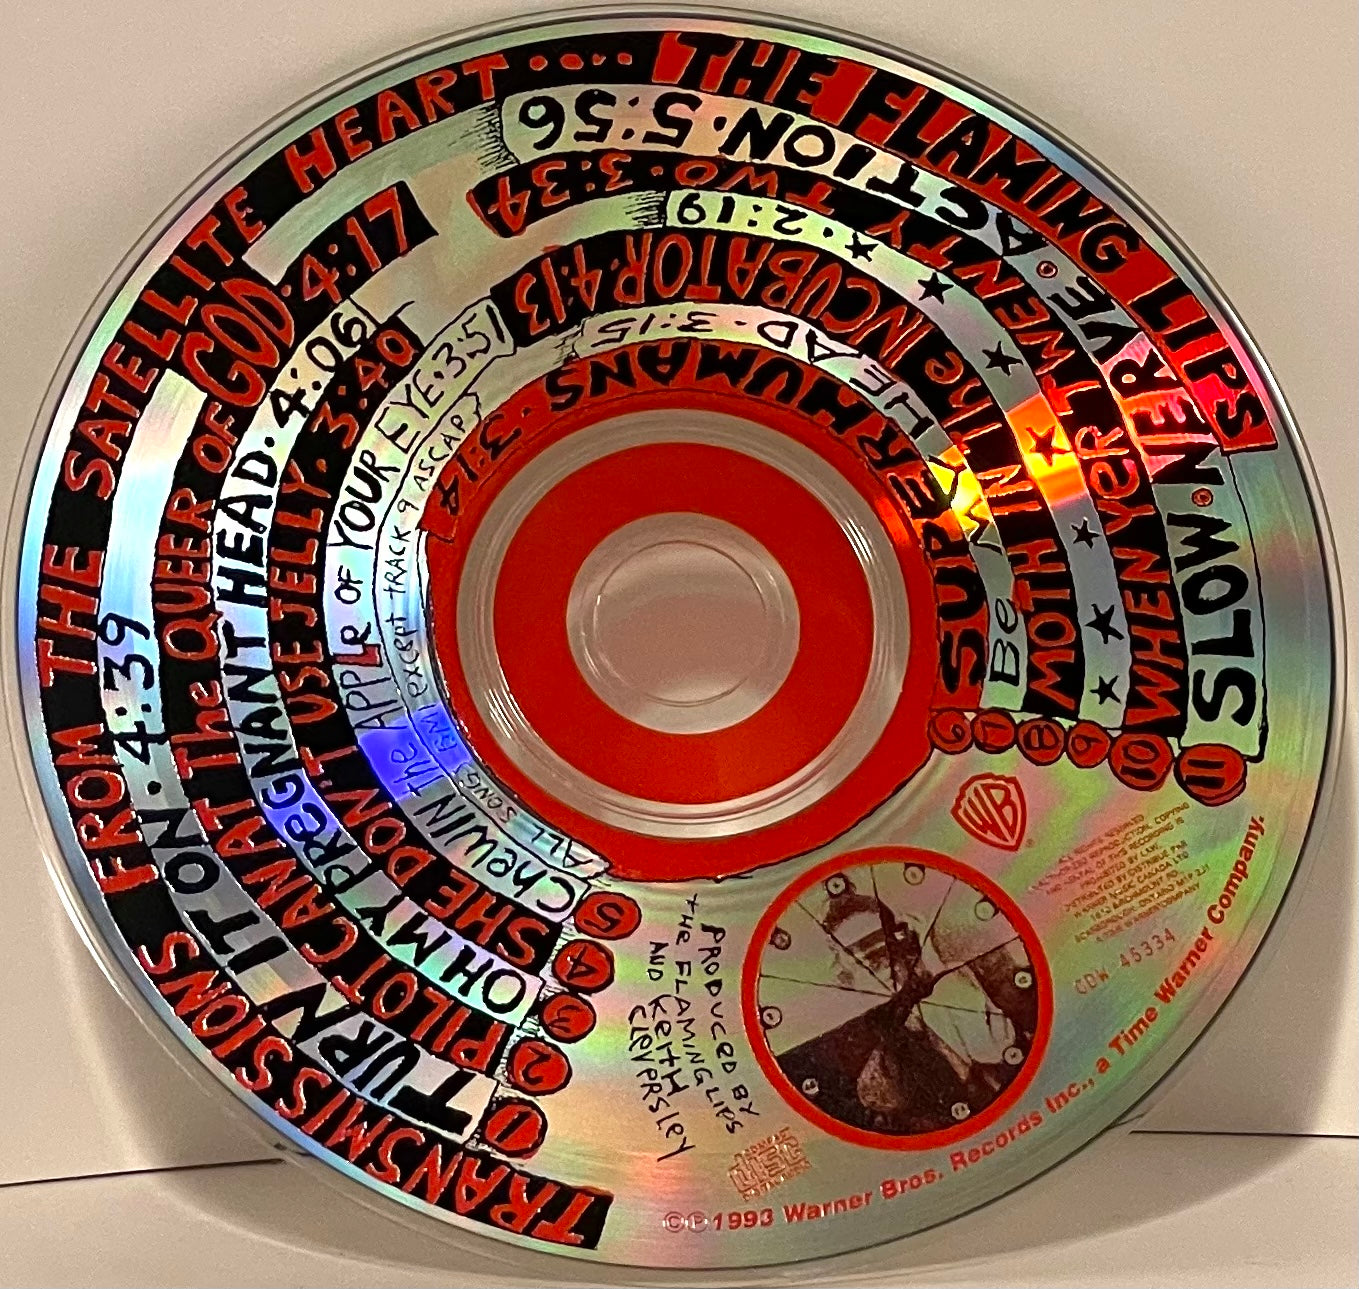 The Flaming Lips – Transmissions From The Satellite Heart 